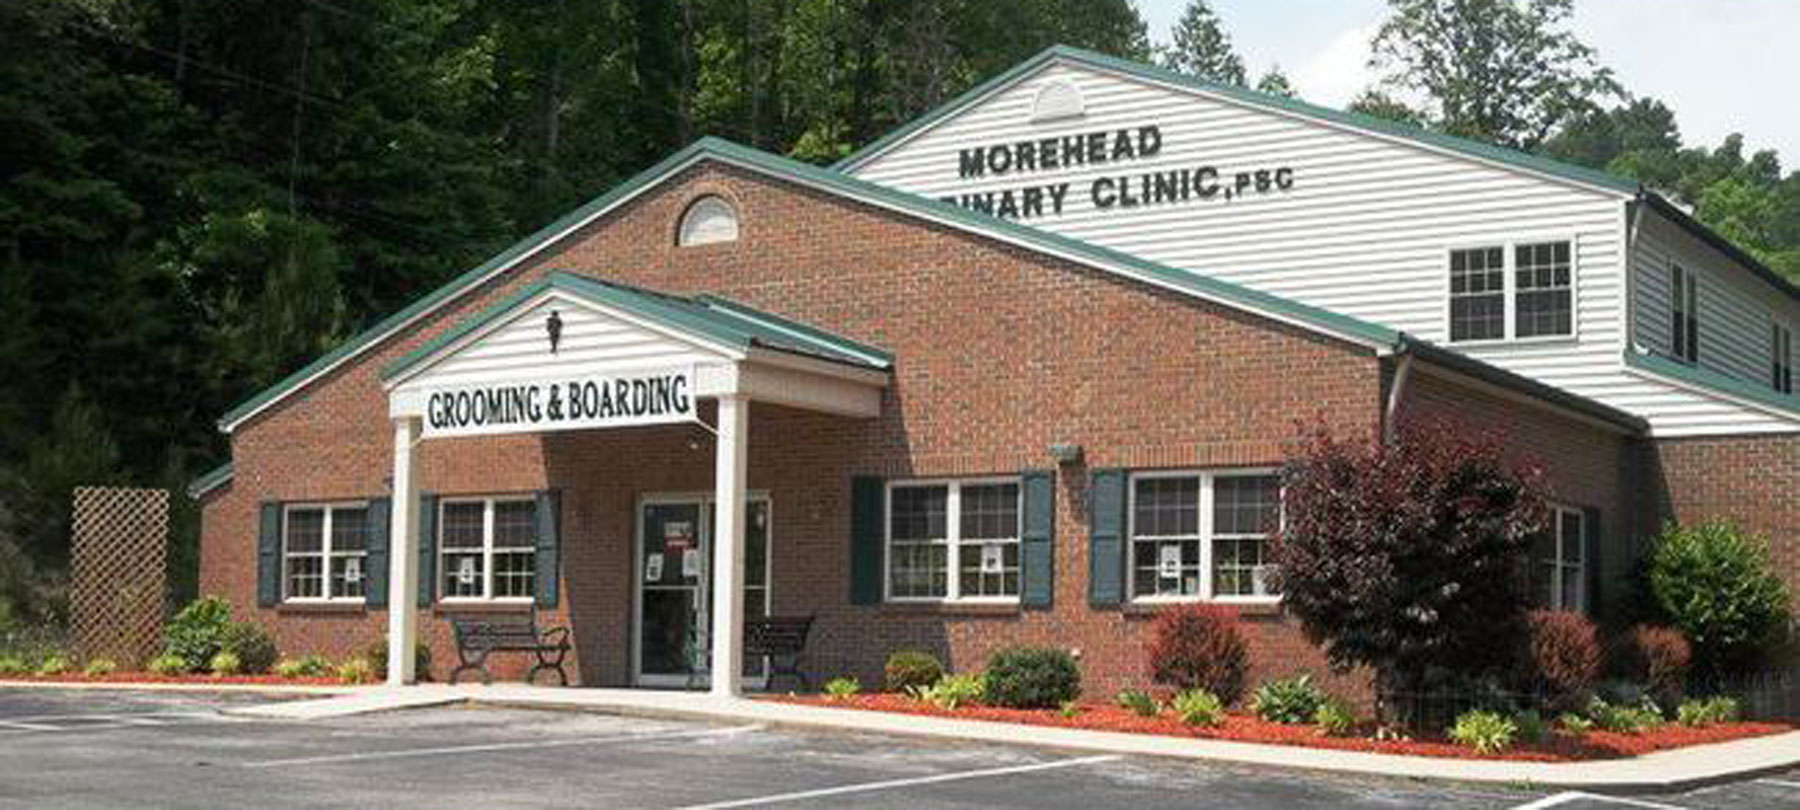 Morehead Veterinary Clinic located in Morehead, Ky. A full service small animal practice that also offers pet grooming services. 